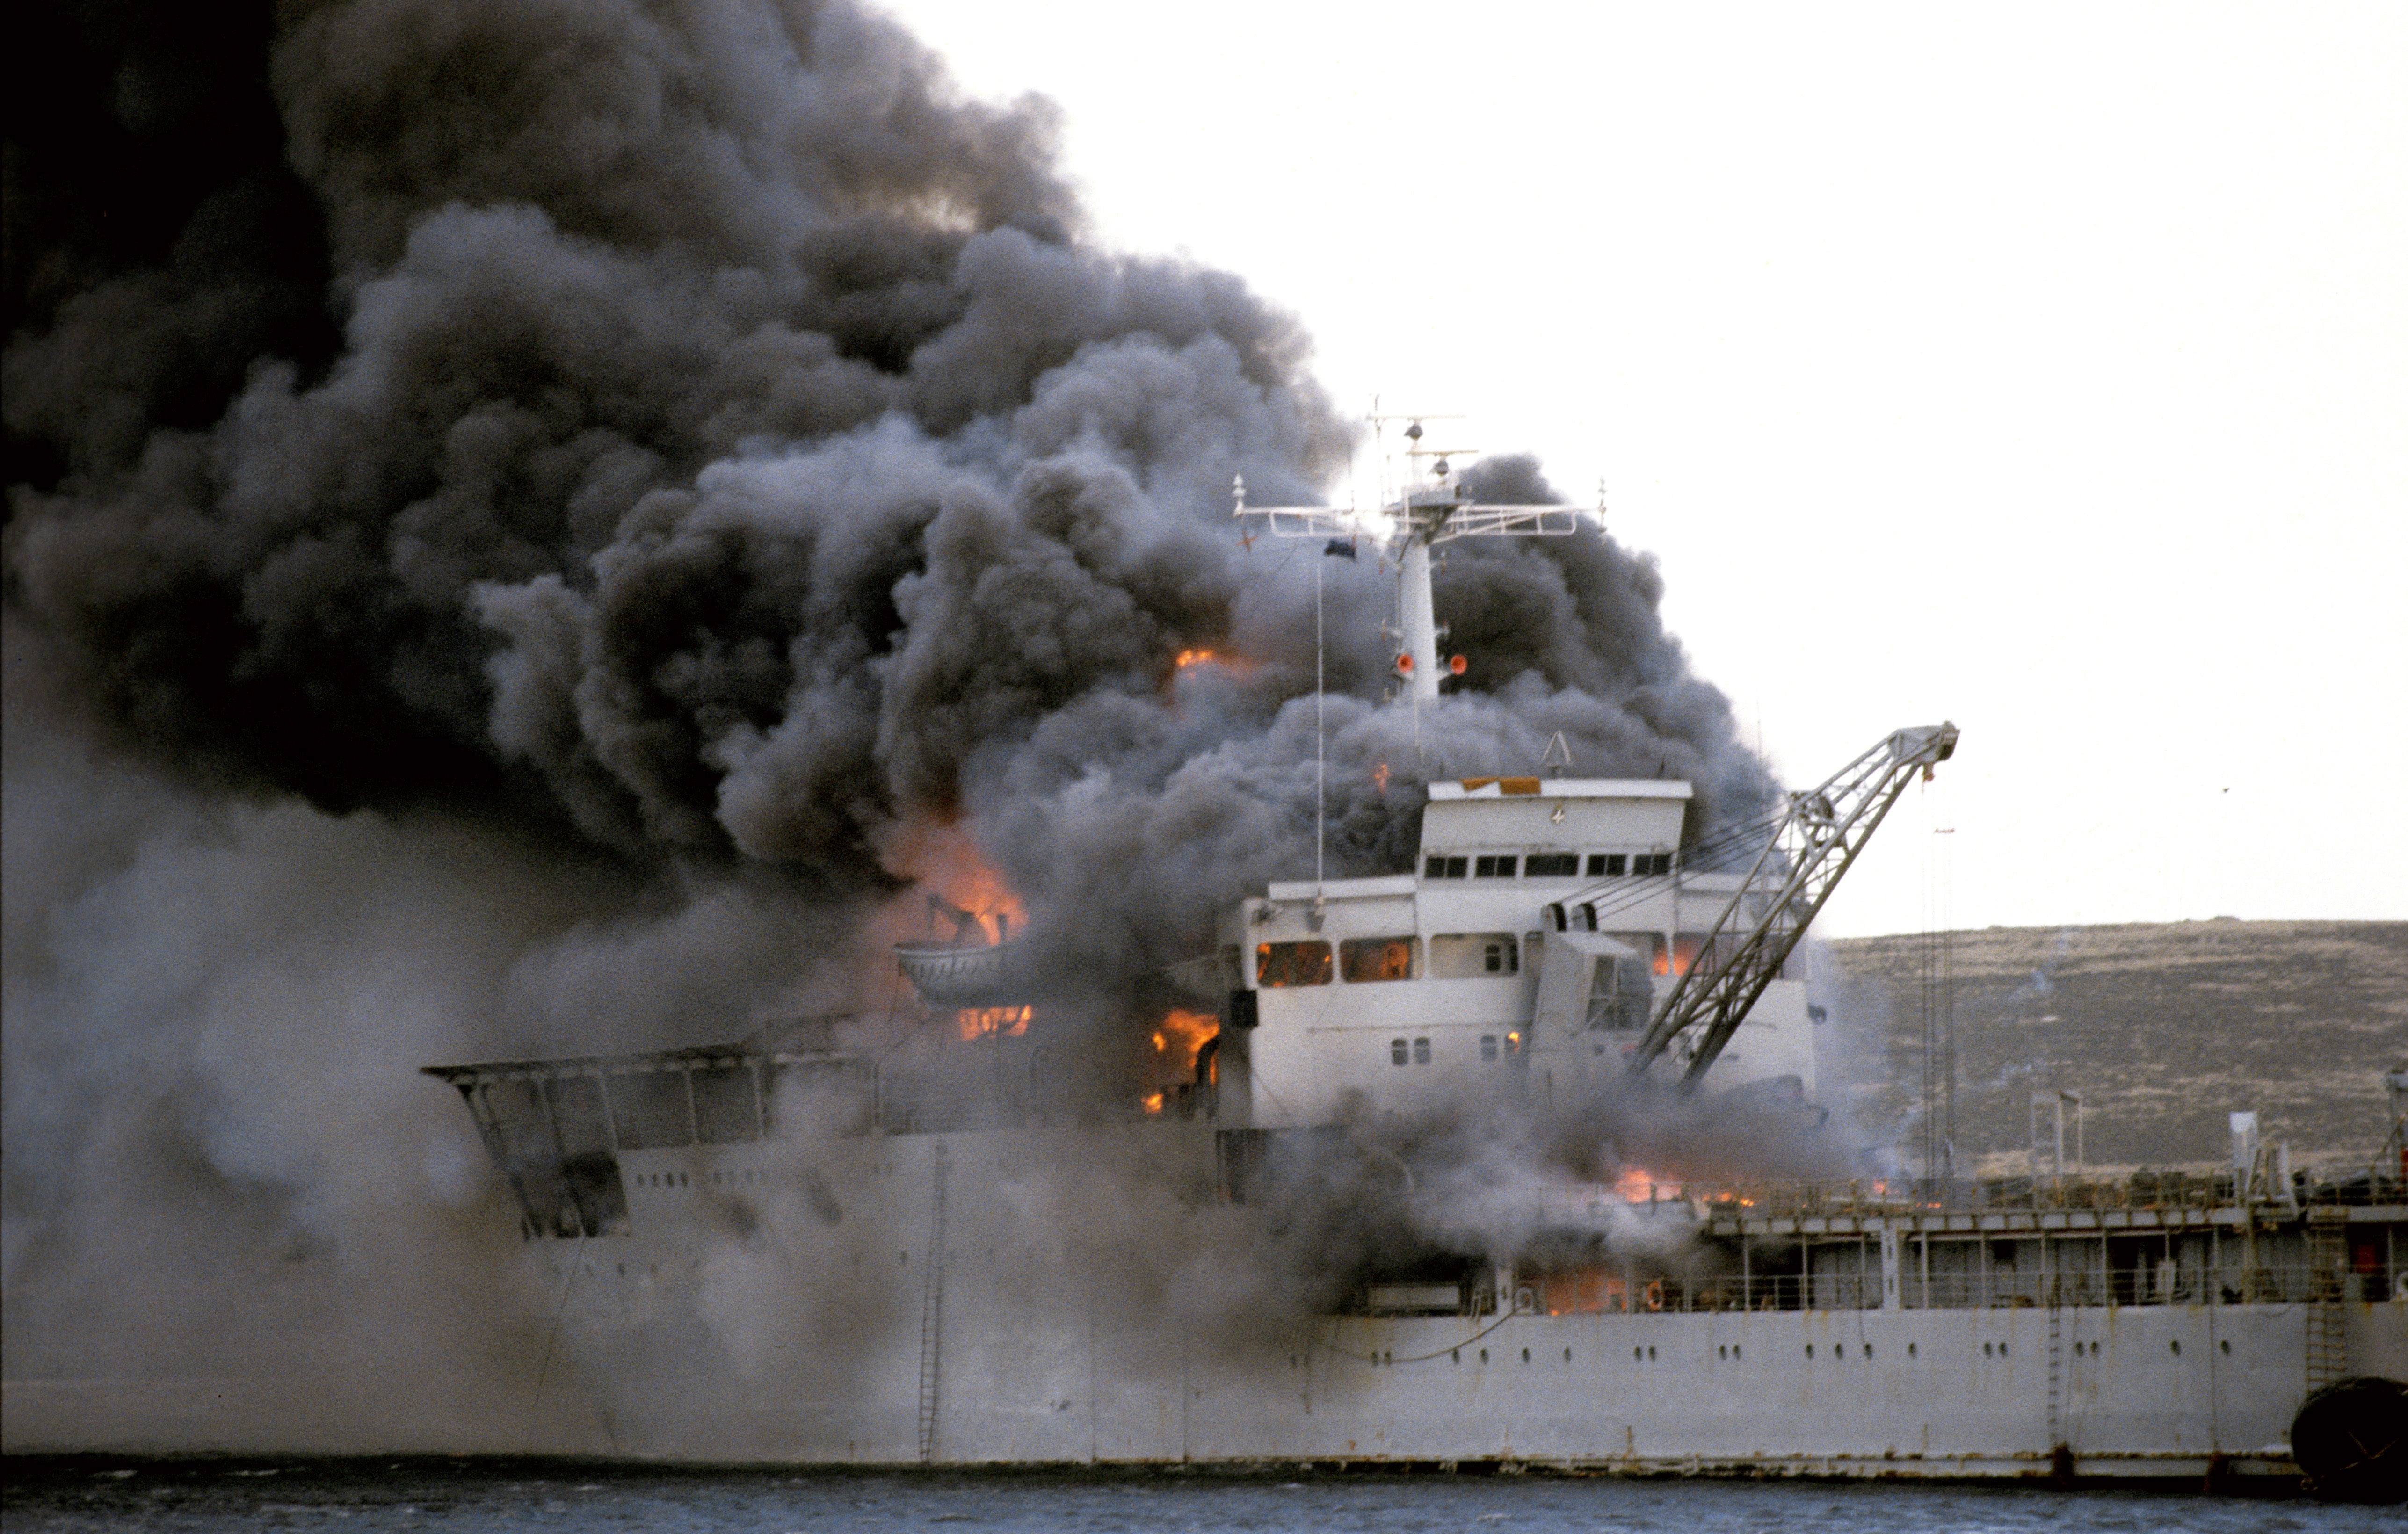 Landing Ship Logistic RFA Sir Galahad ablaze after the Argentine air raid on June 8th at Bluff Cove near Fitzroy settlement on East Falkland